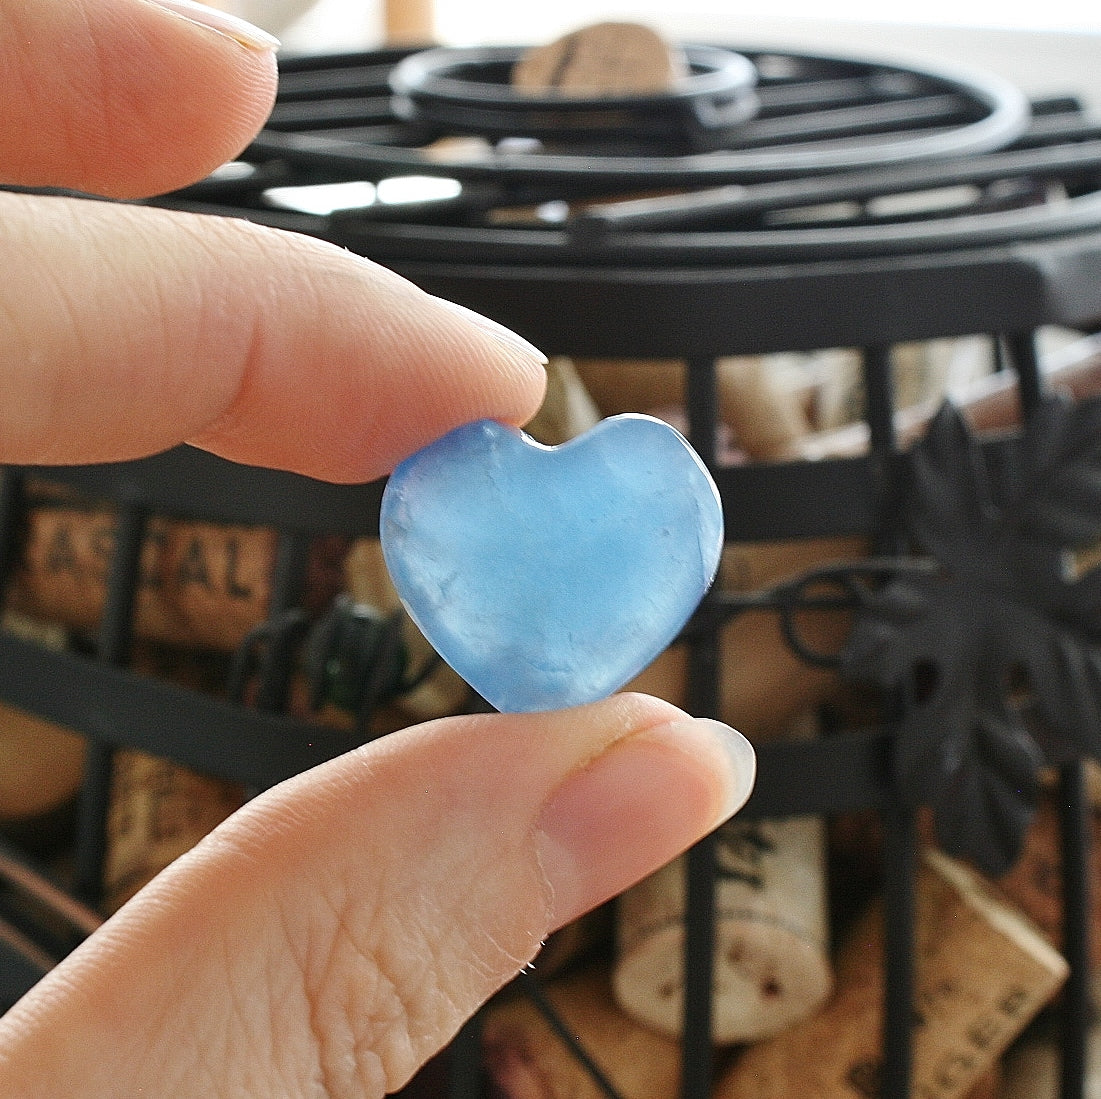 Blue Calcite Crystal Heart from Argentina, also called Blue Onyx or Lemurian Aquatine Calcite Grade A